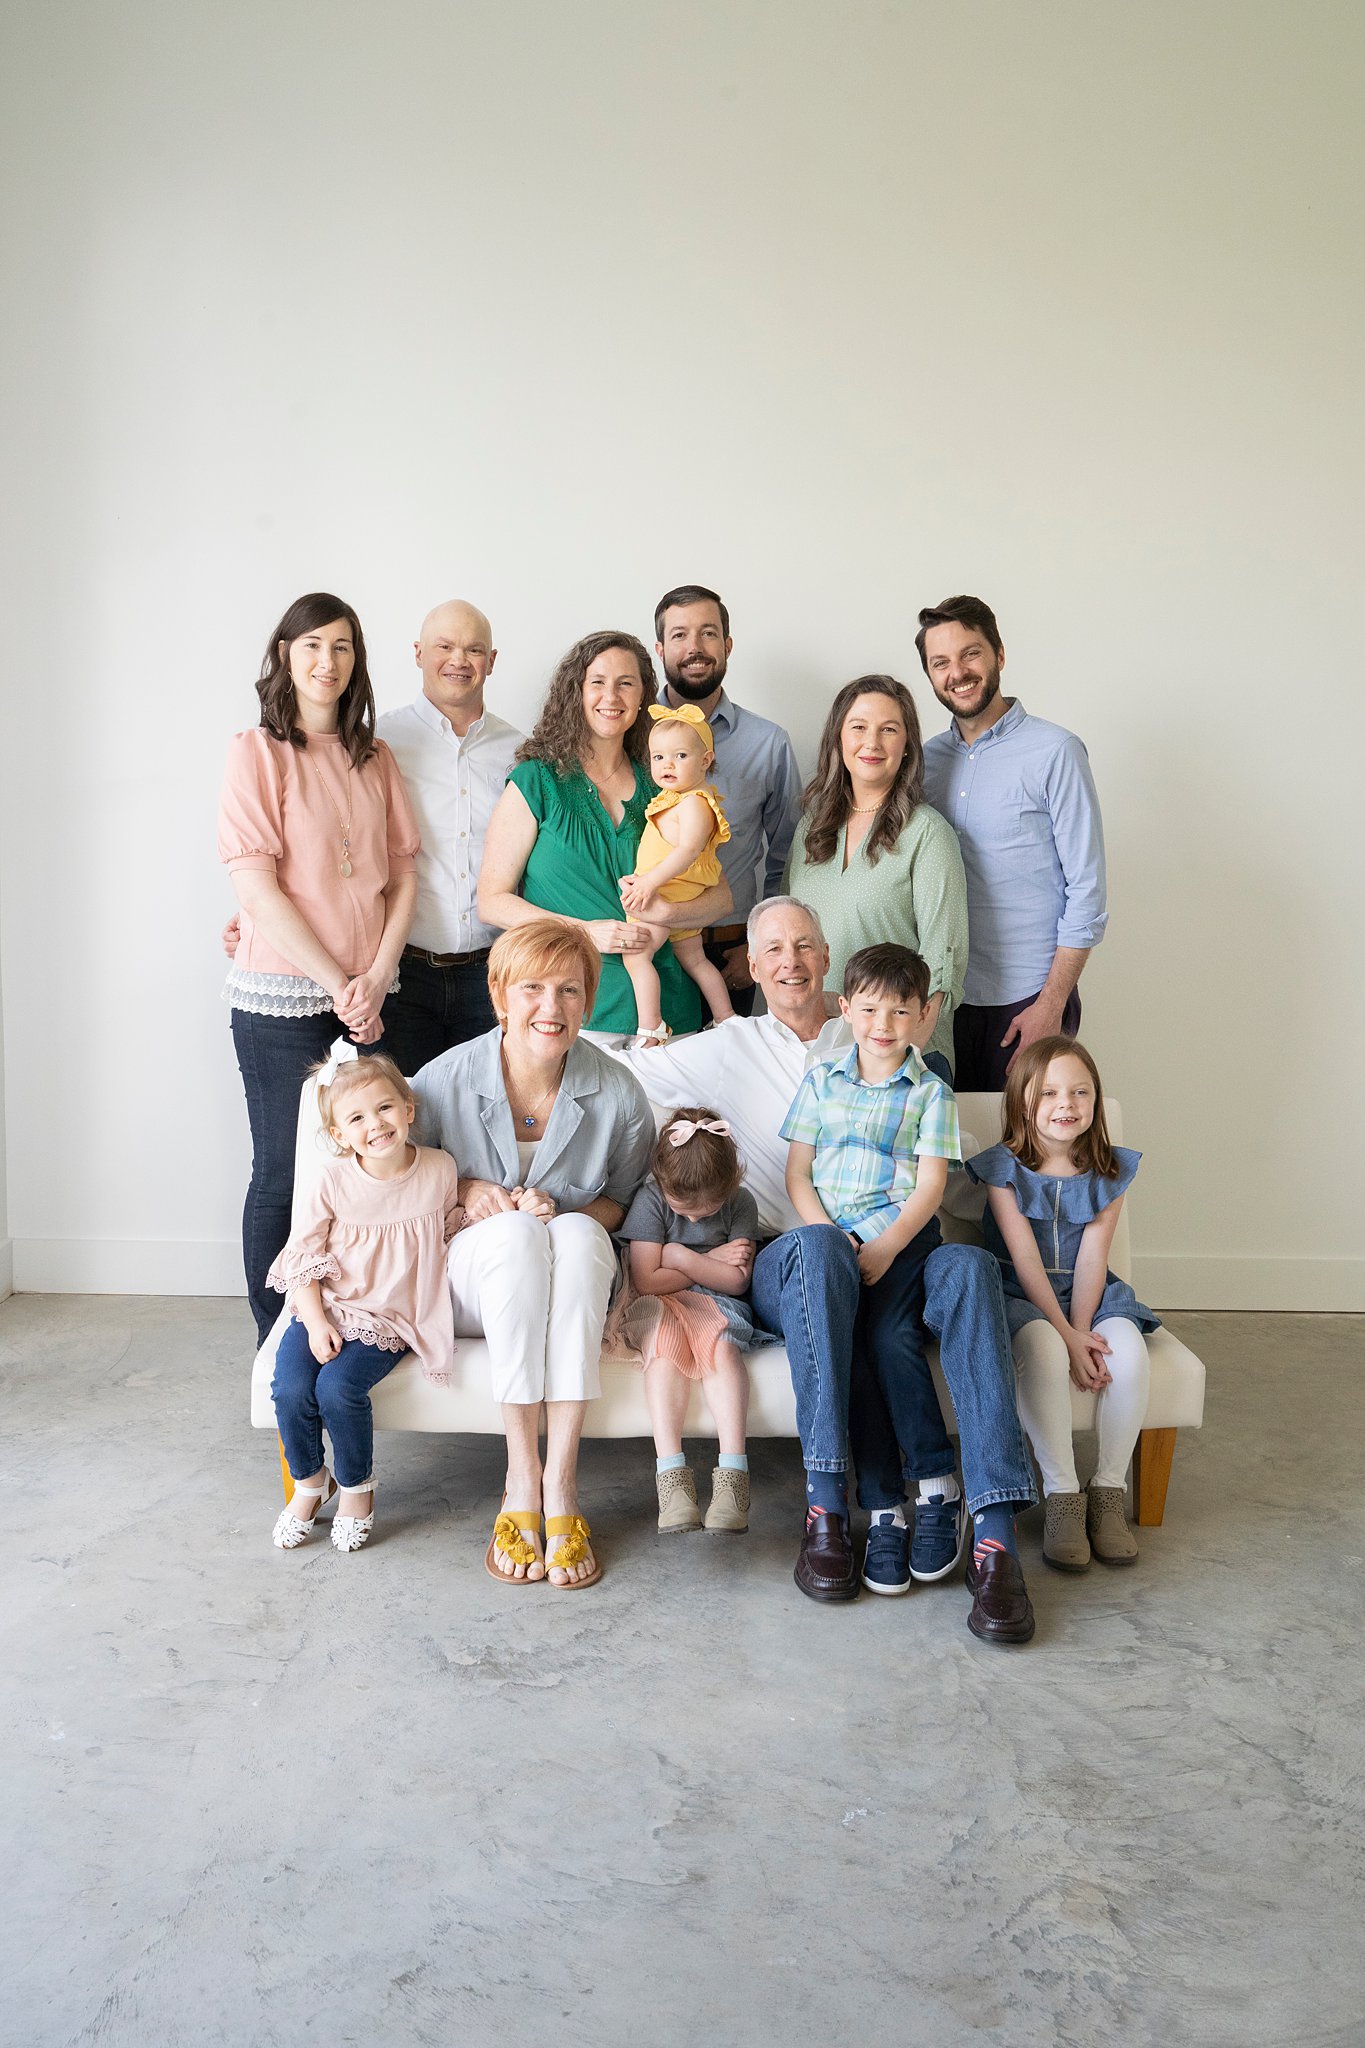 Extended Family Photos How to make them Stress-Free